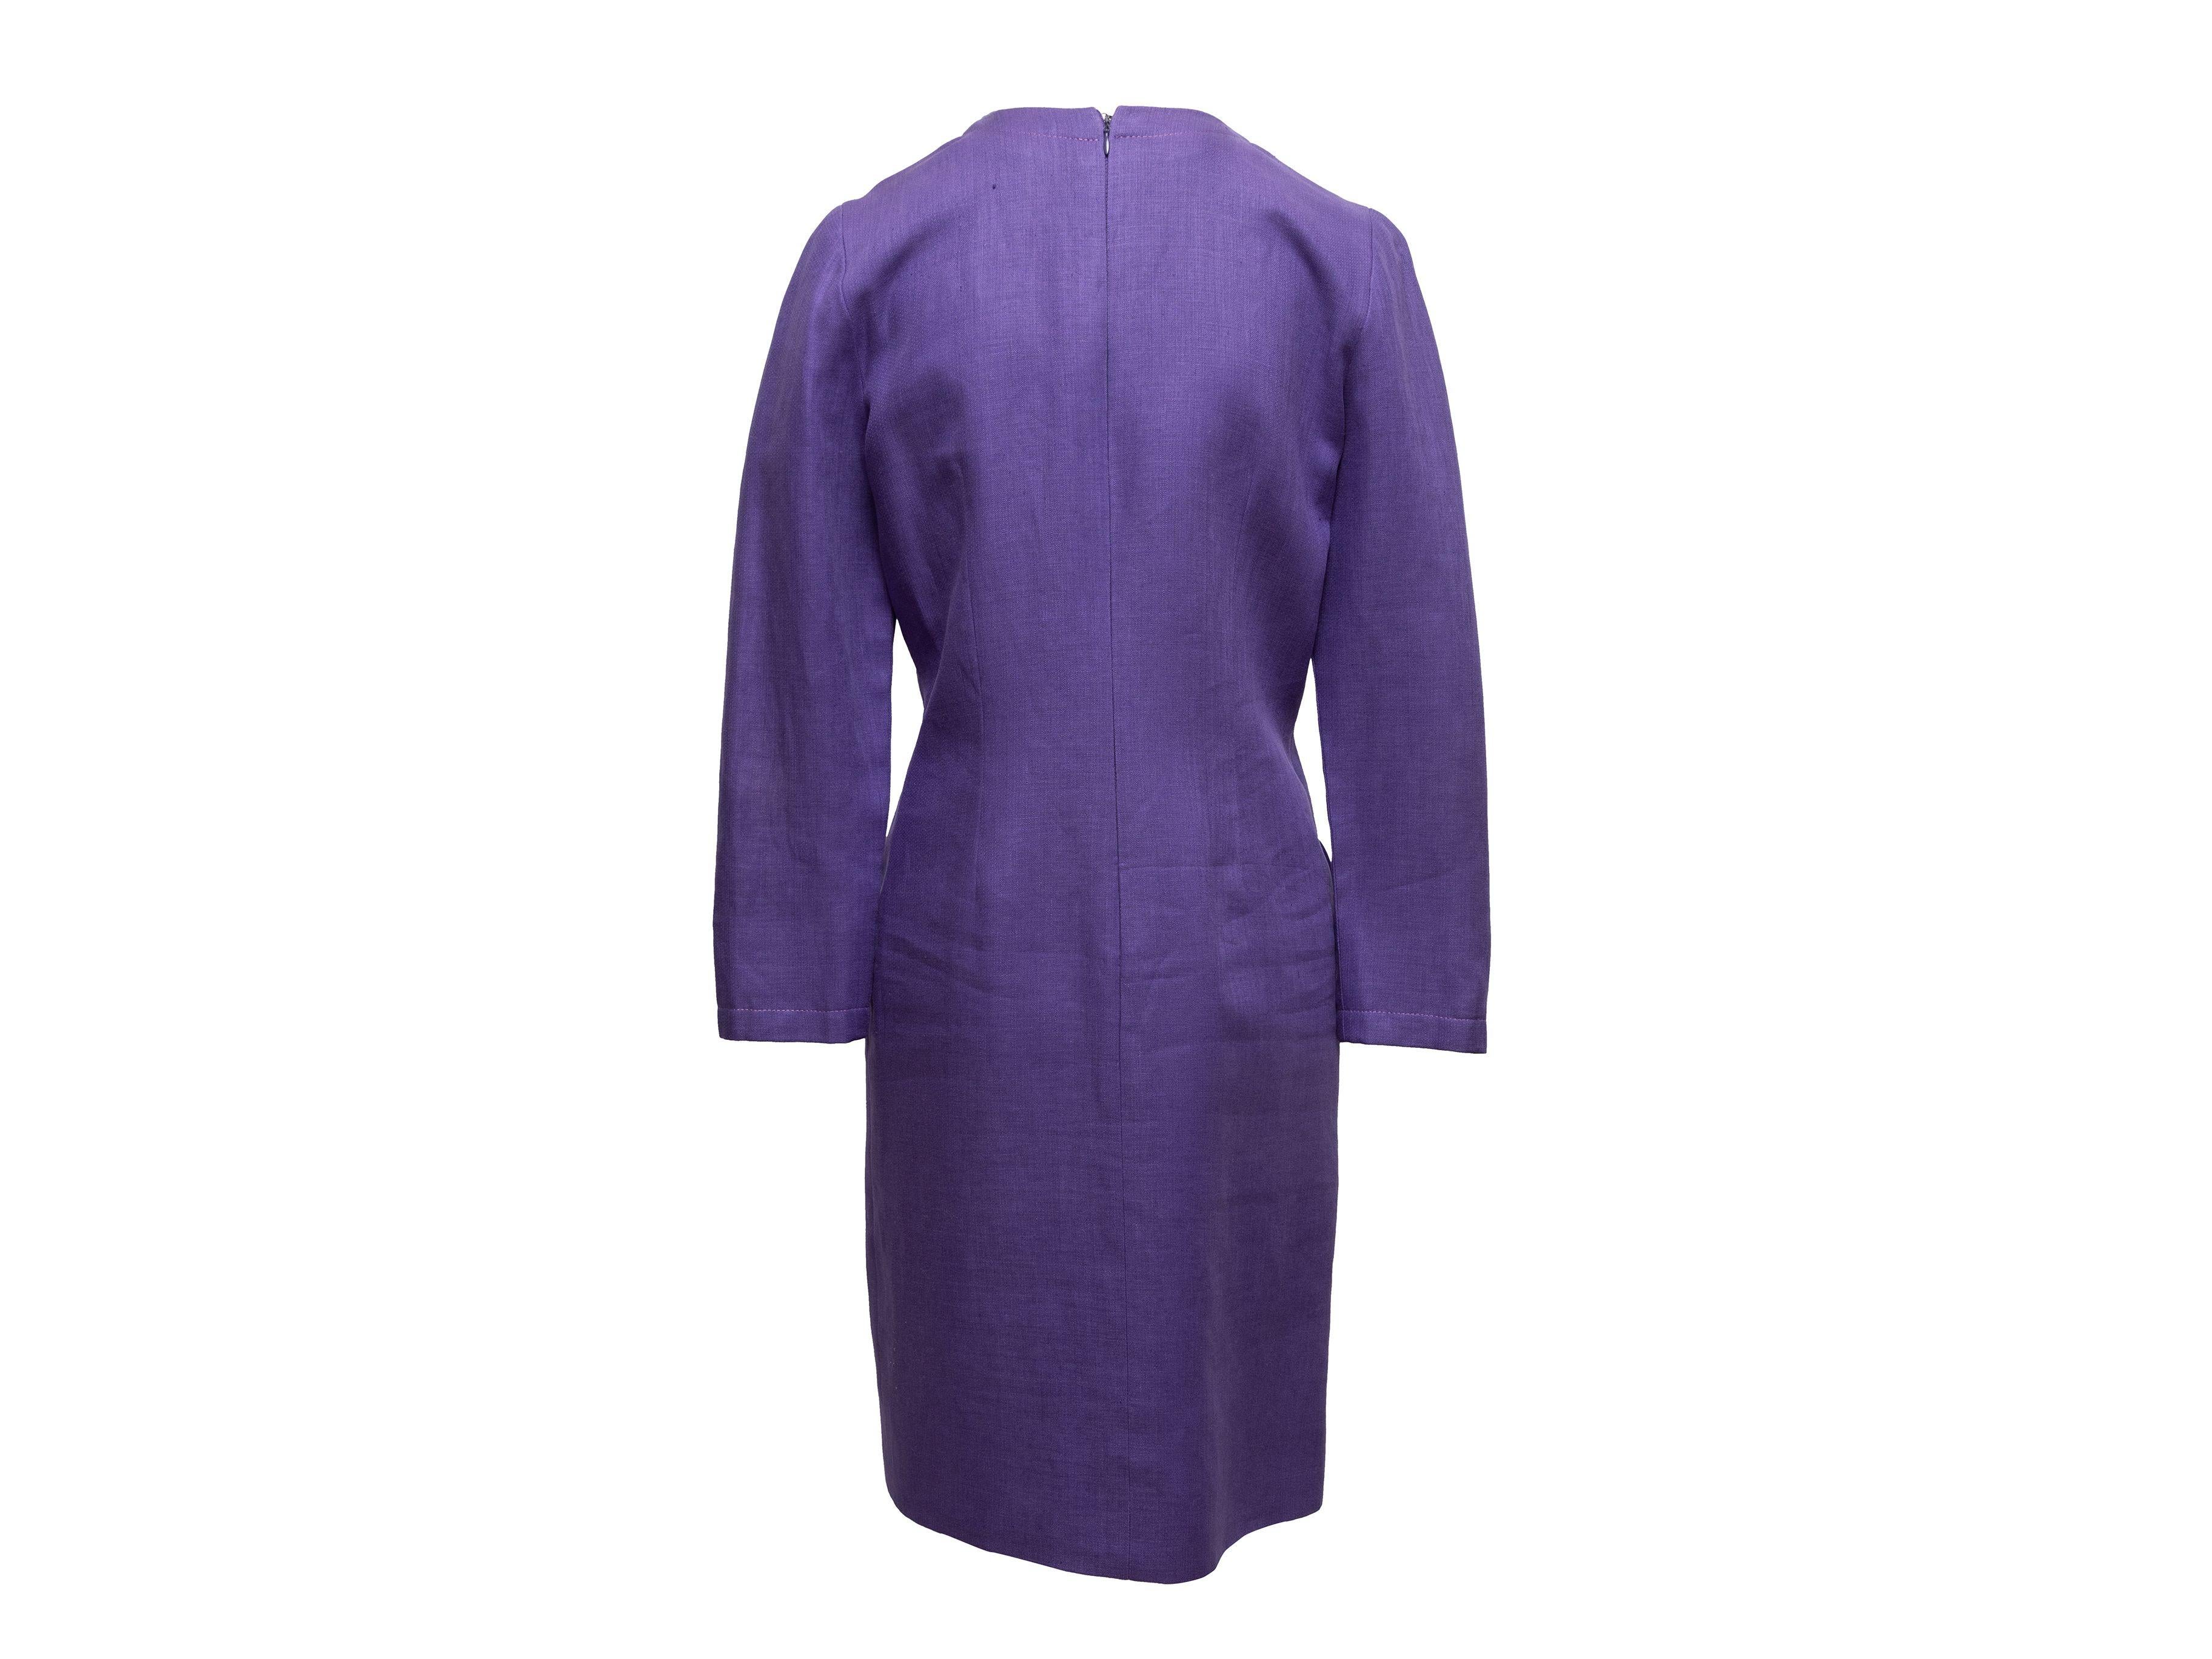 Product Details: Vintage purple linen long sleeve dress by Bill Blass. Gold-tone hardware. Crew neck. Button at front. Zip closure at center back. 34